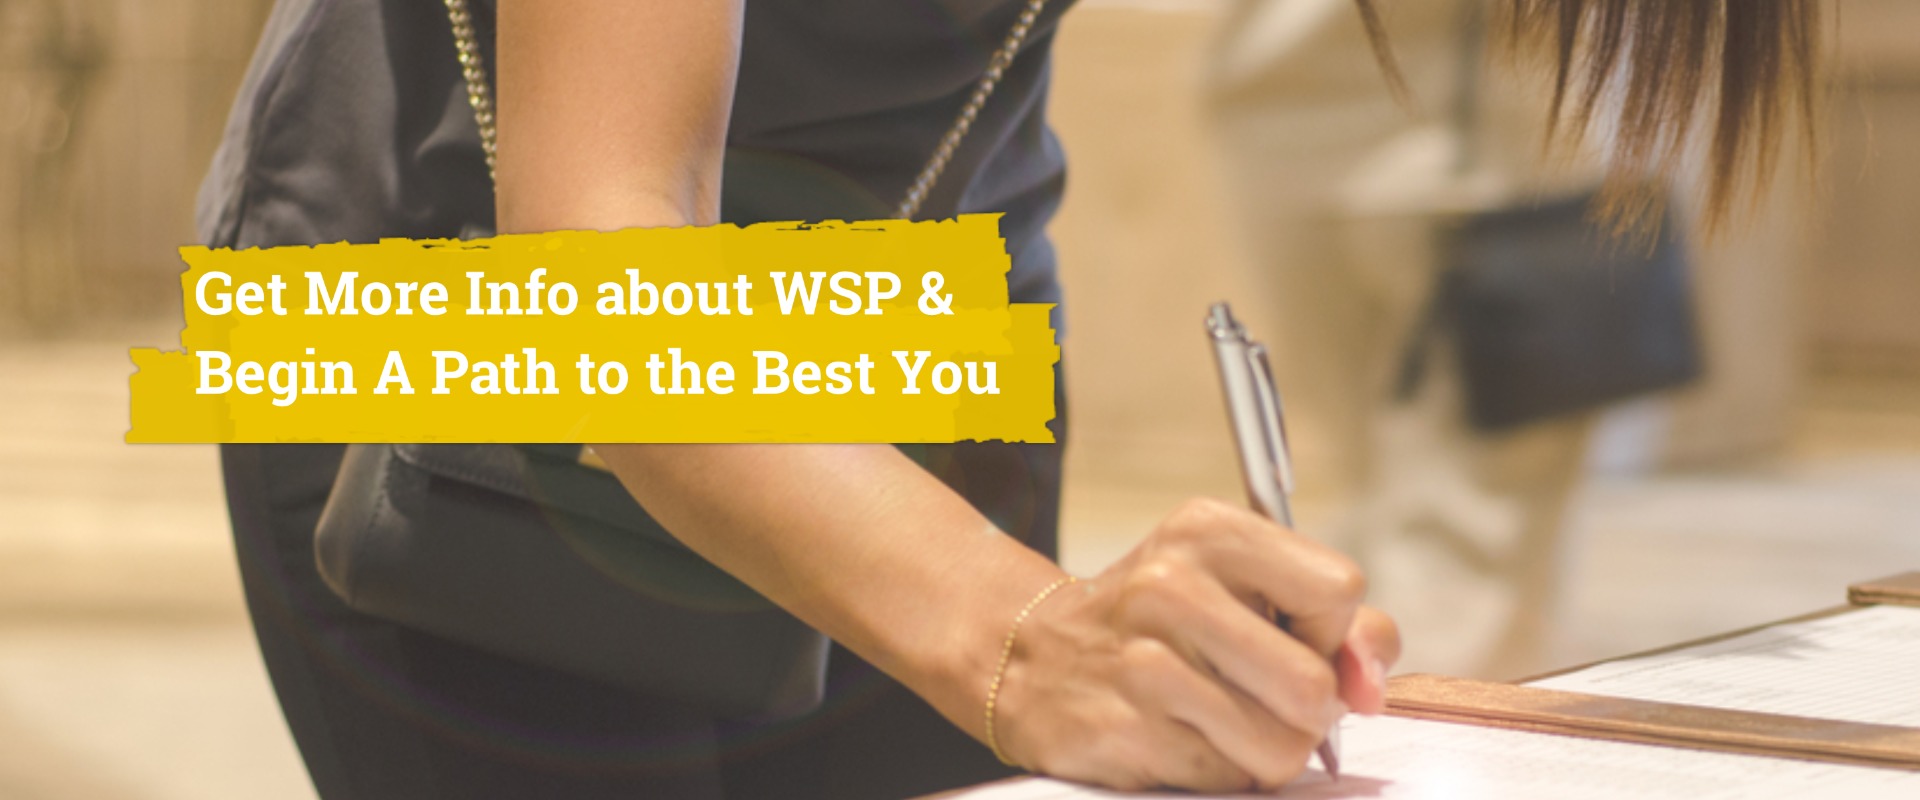 Request information about the WSP program